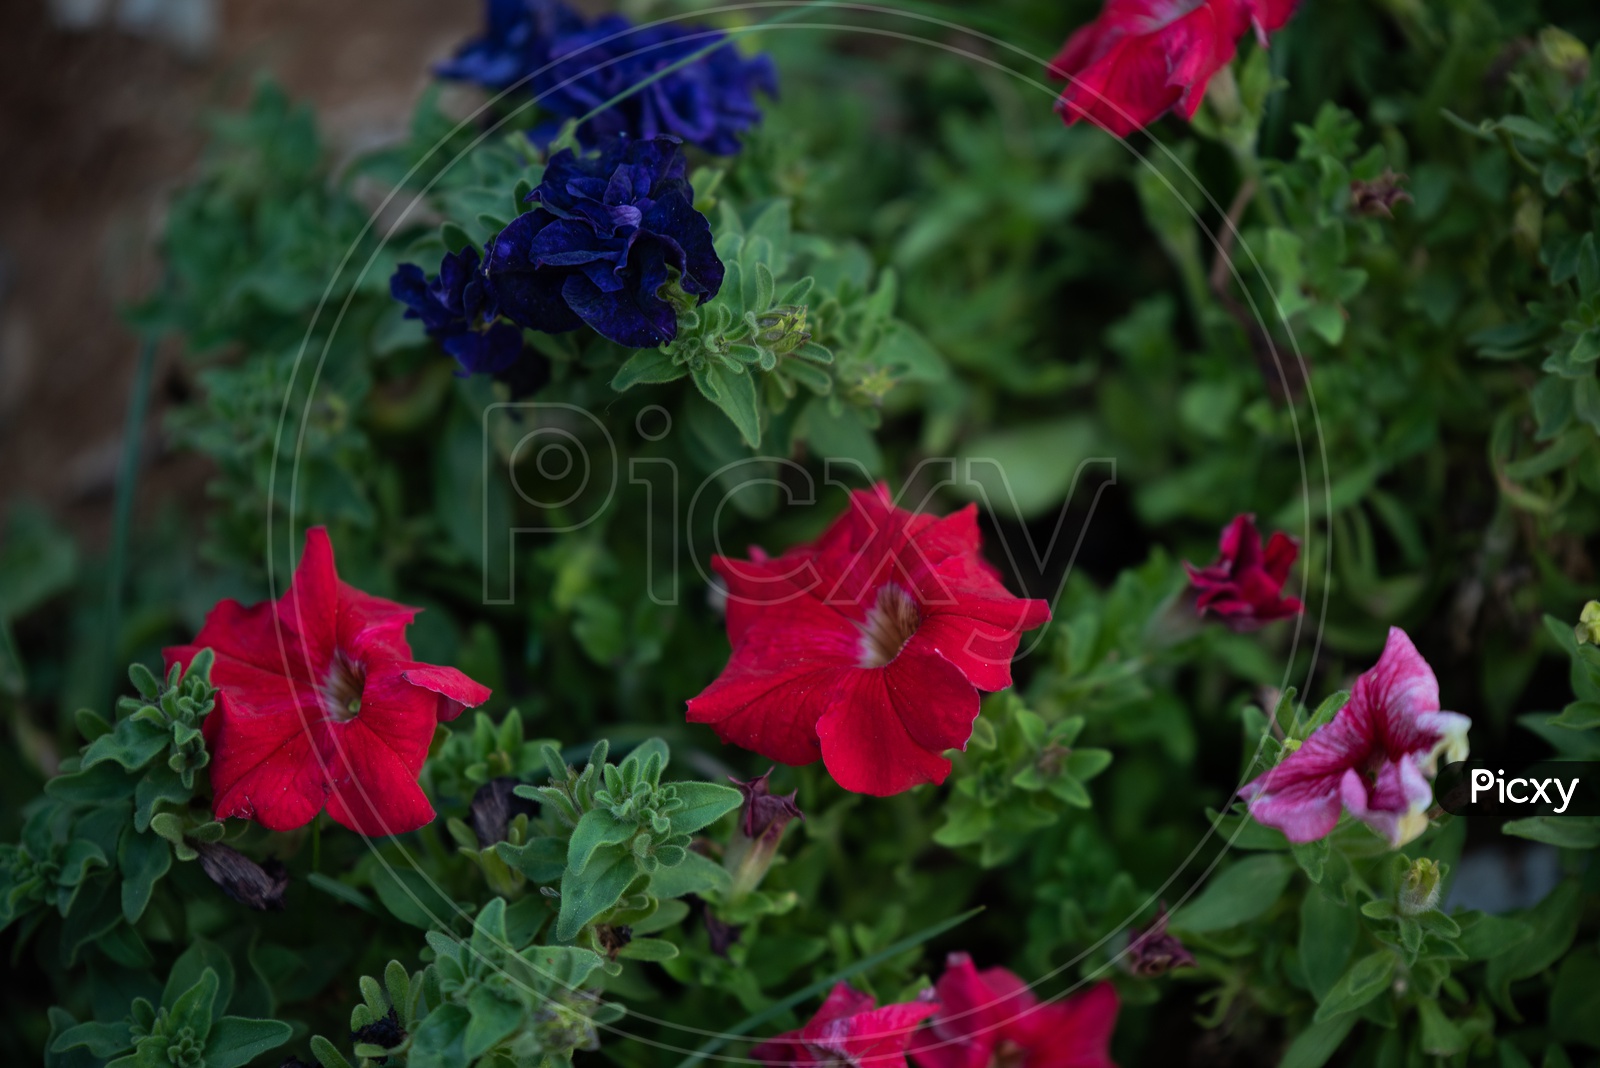 Colorful Petunia Flowers on plants  in a  Garden